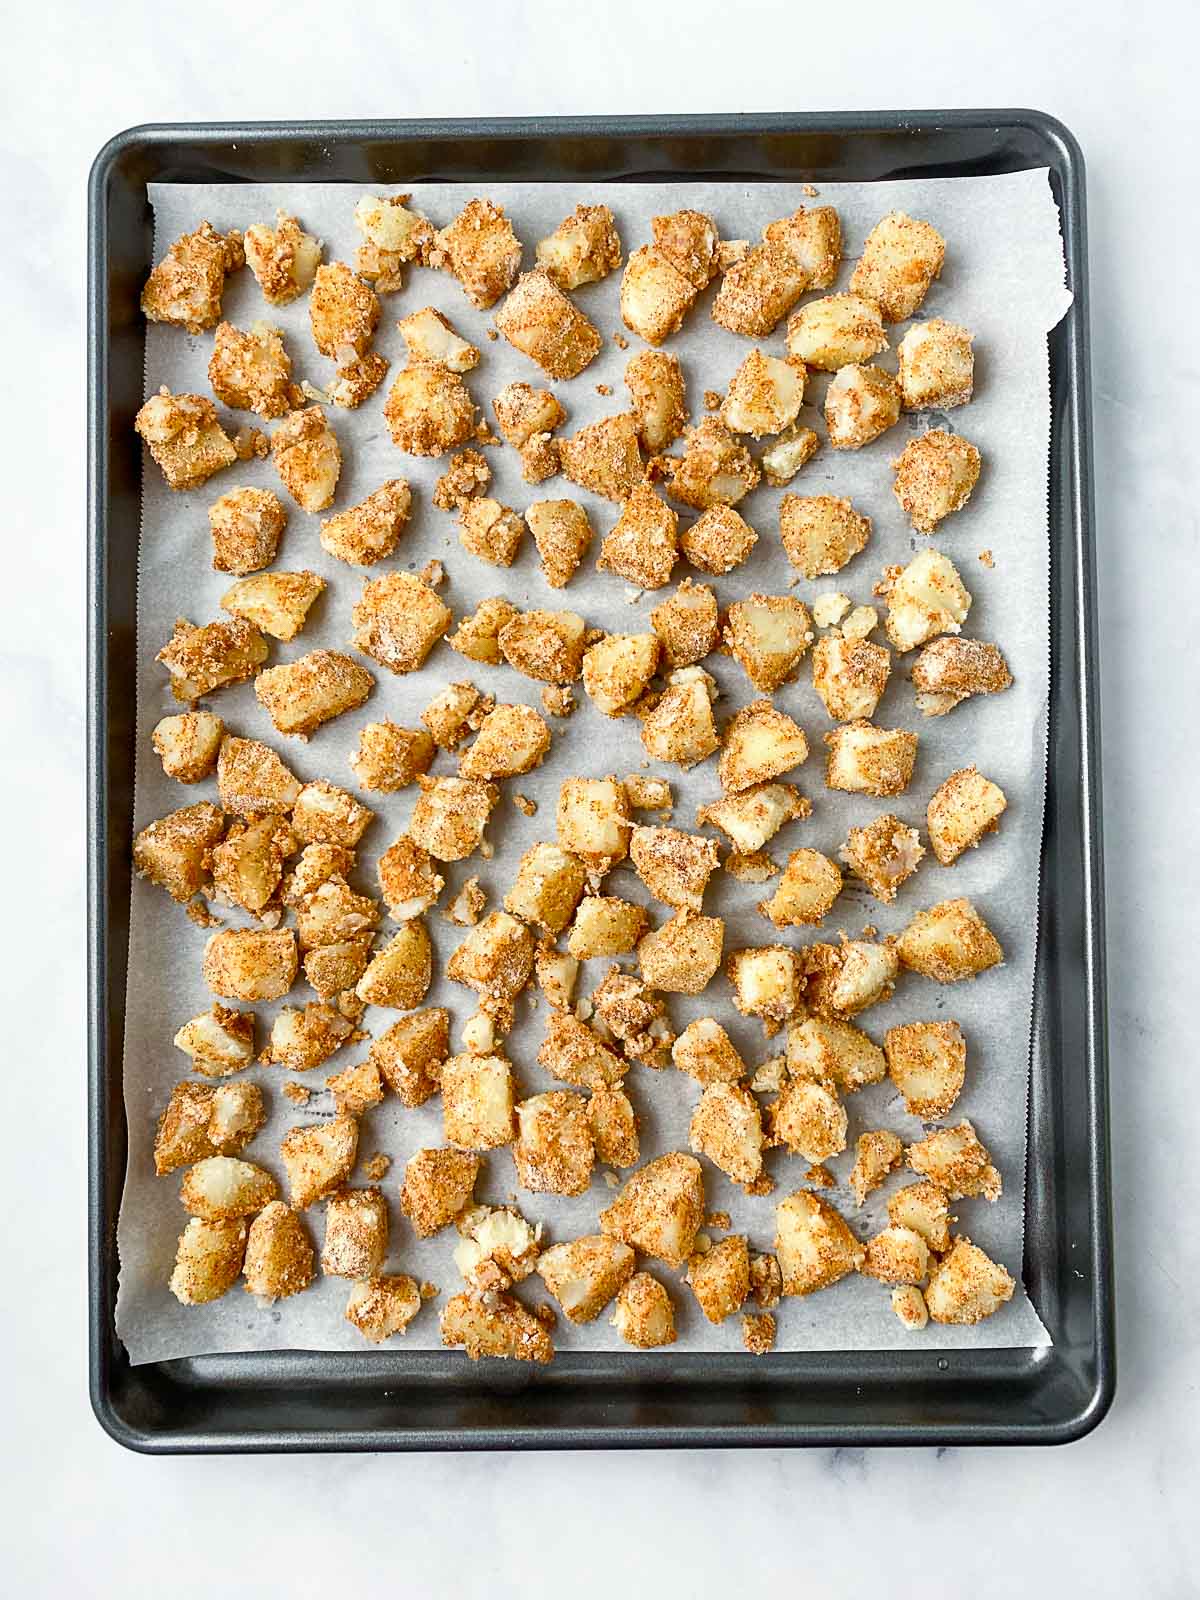 Seasoned diced potatoes on a parchment lined baking sheet.